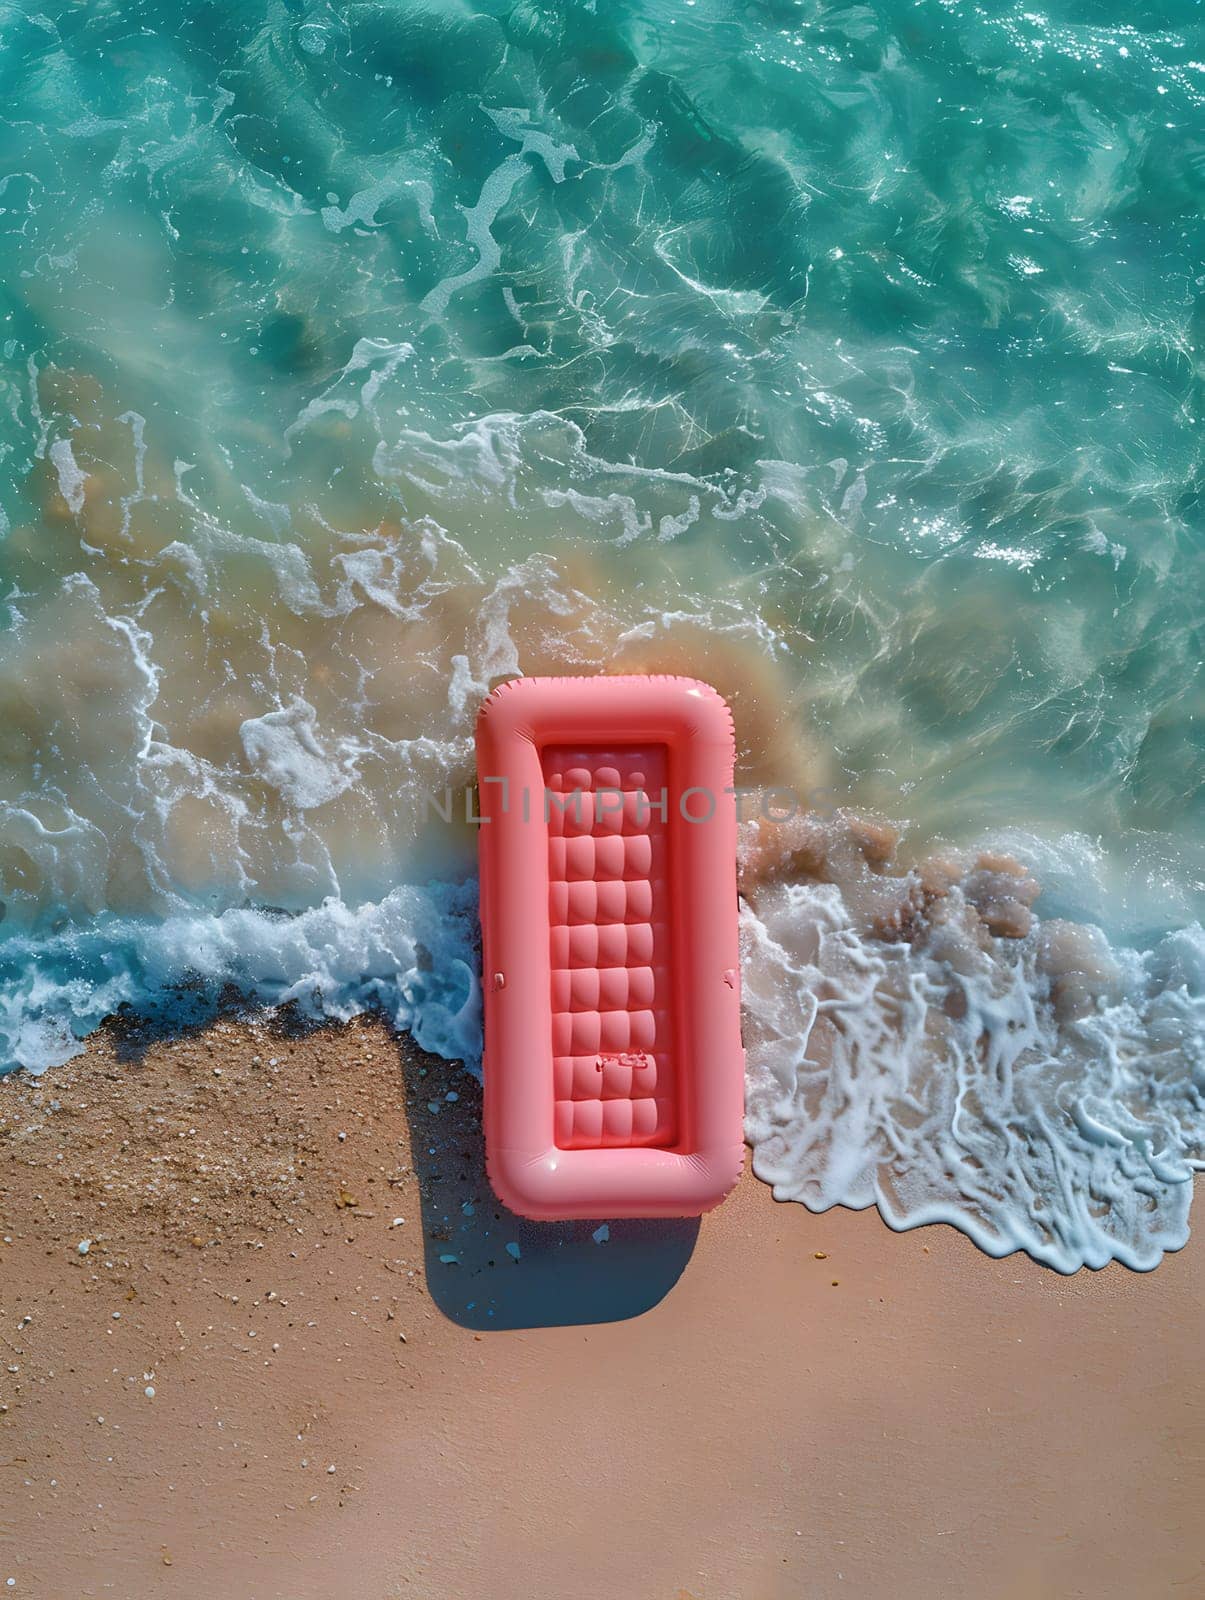 A magenta plastic inflatable raft shaped like a rectangle is drifting on the electric blue waters of the ocean at the beach